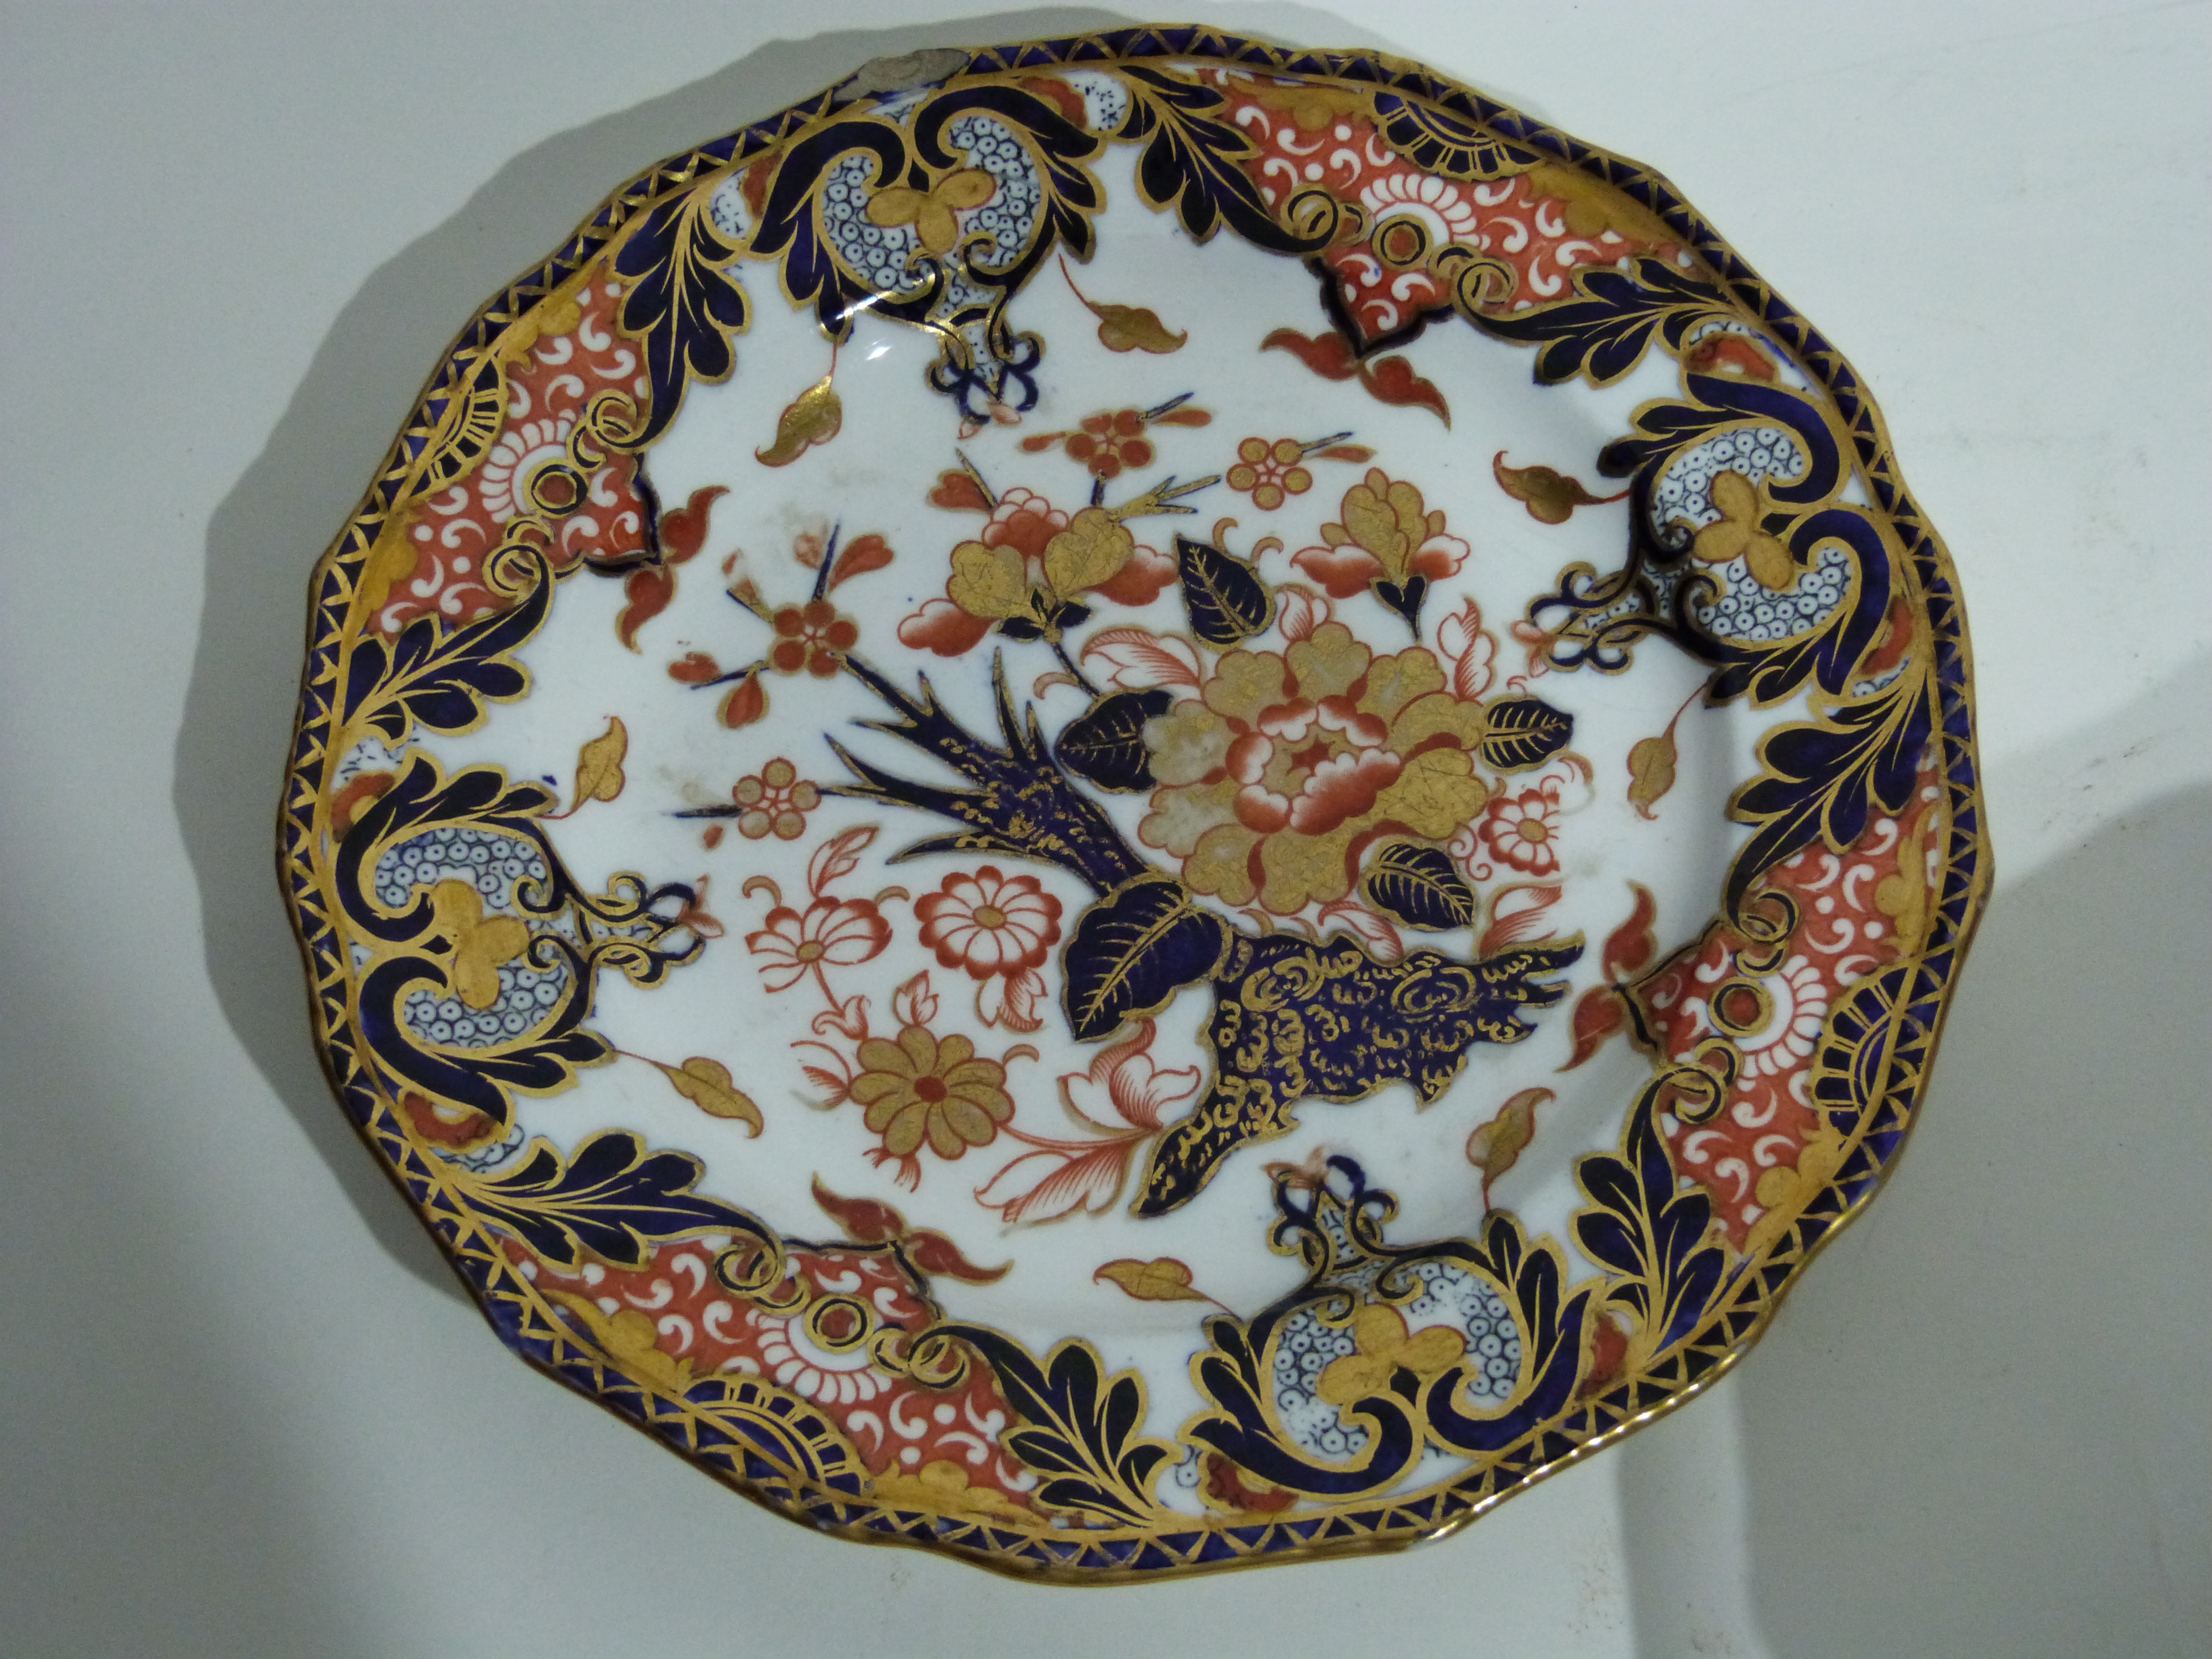 Set of 12 19th century Crown Derby plates all with typical Imari designs in blue, gilt and red, - Image 3 of 4